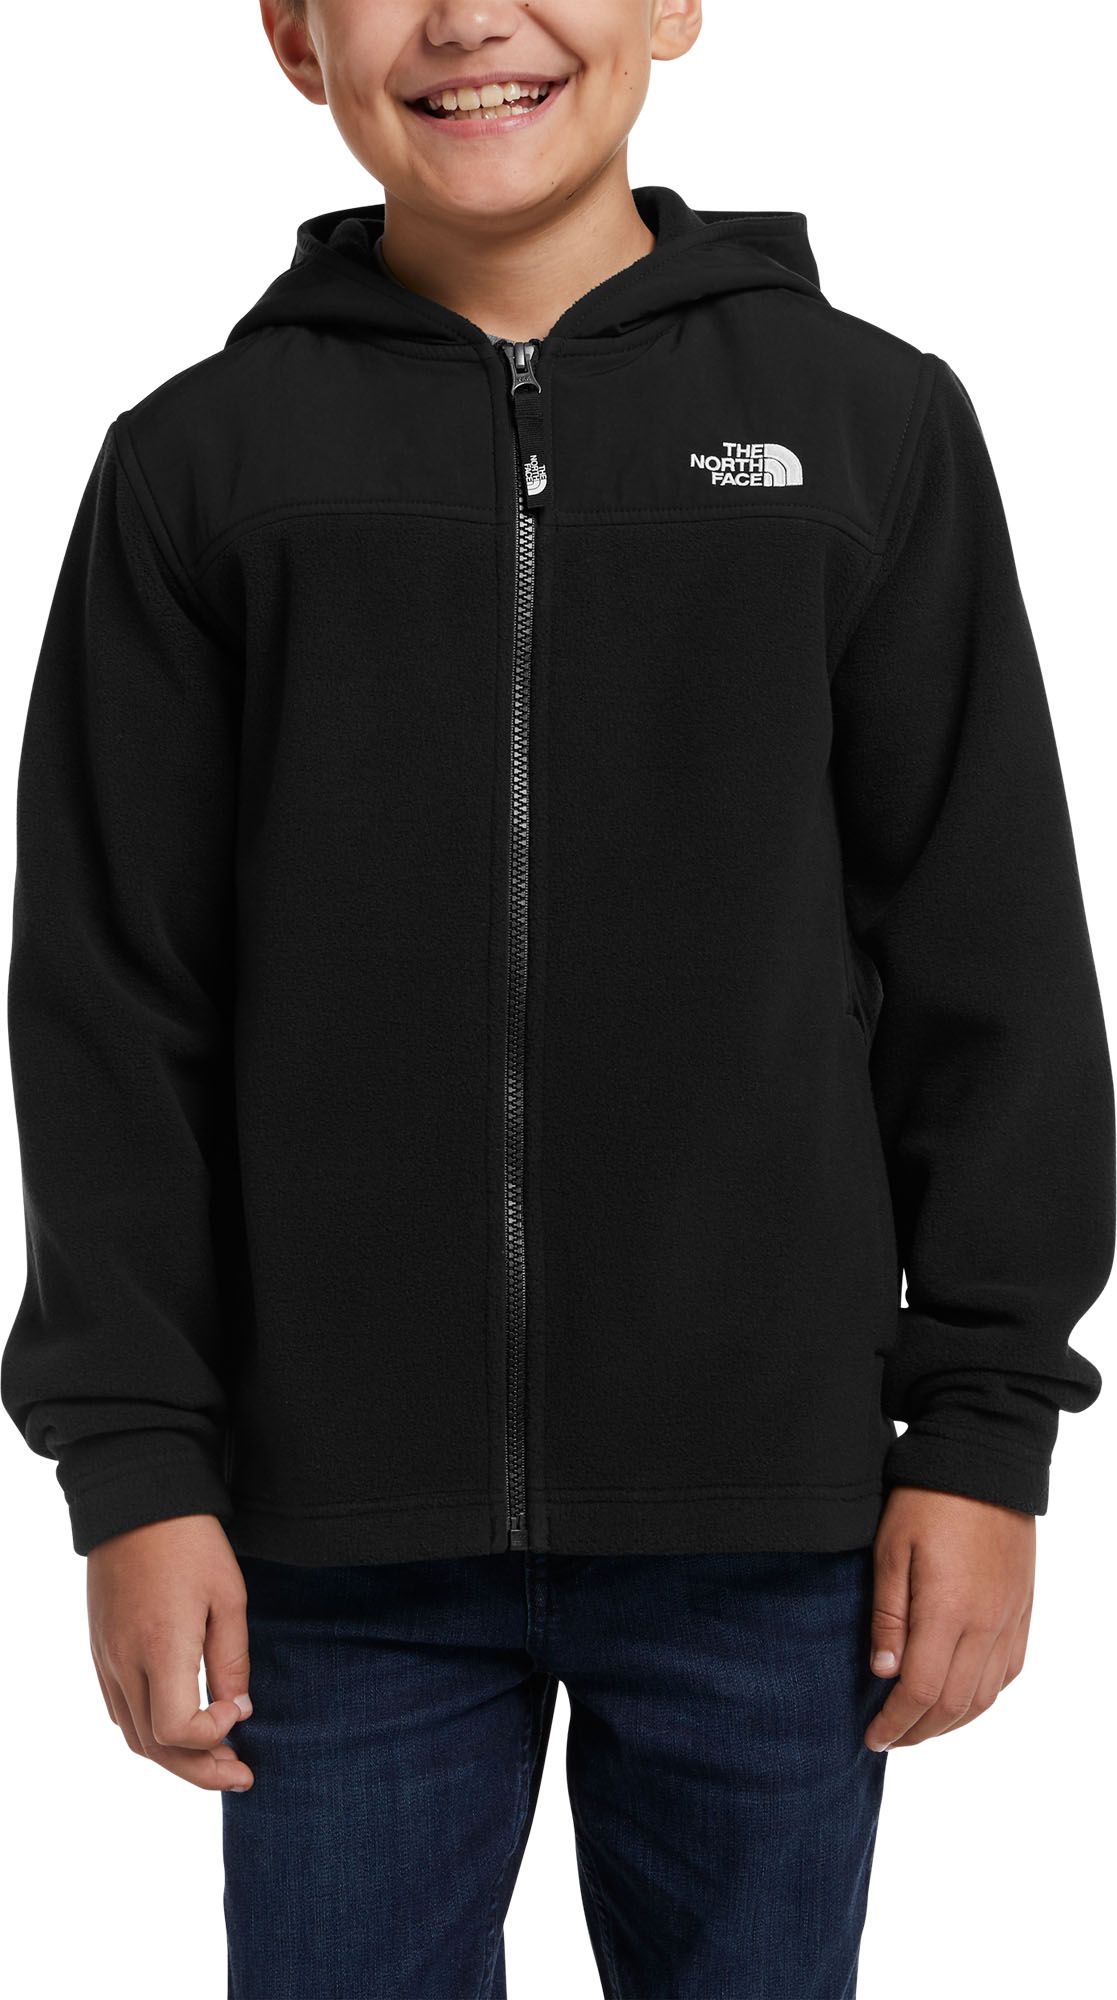 The North Face Boys' All Around Hoodie 